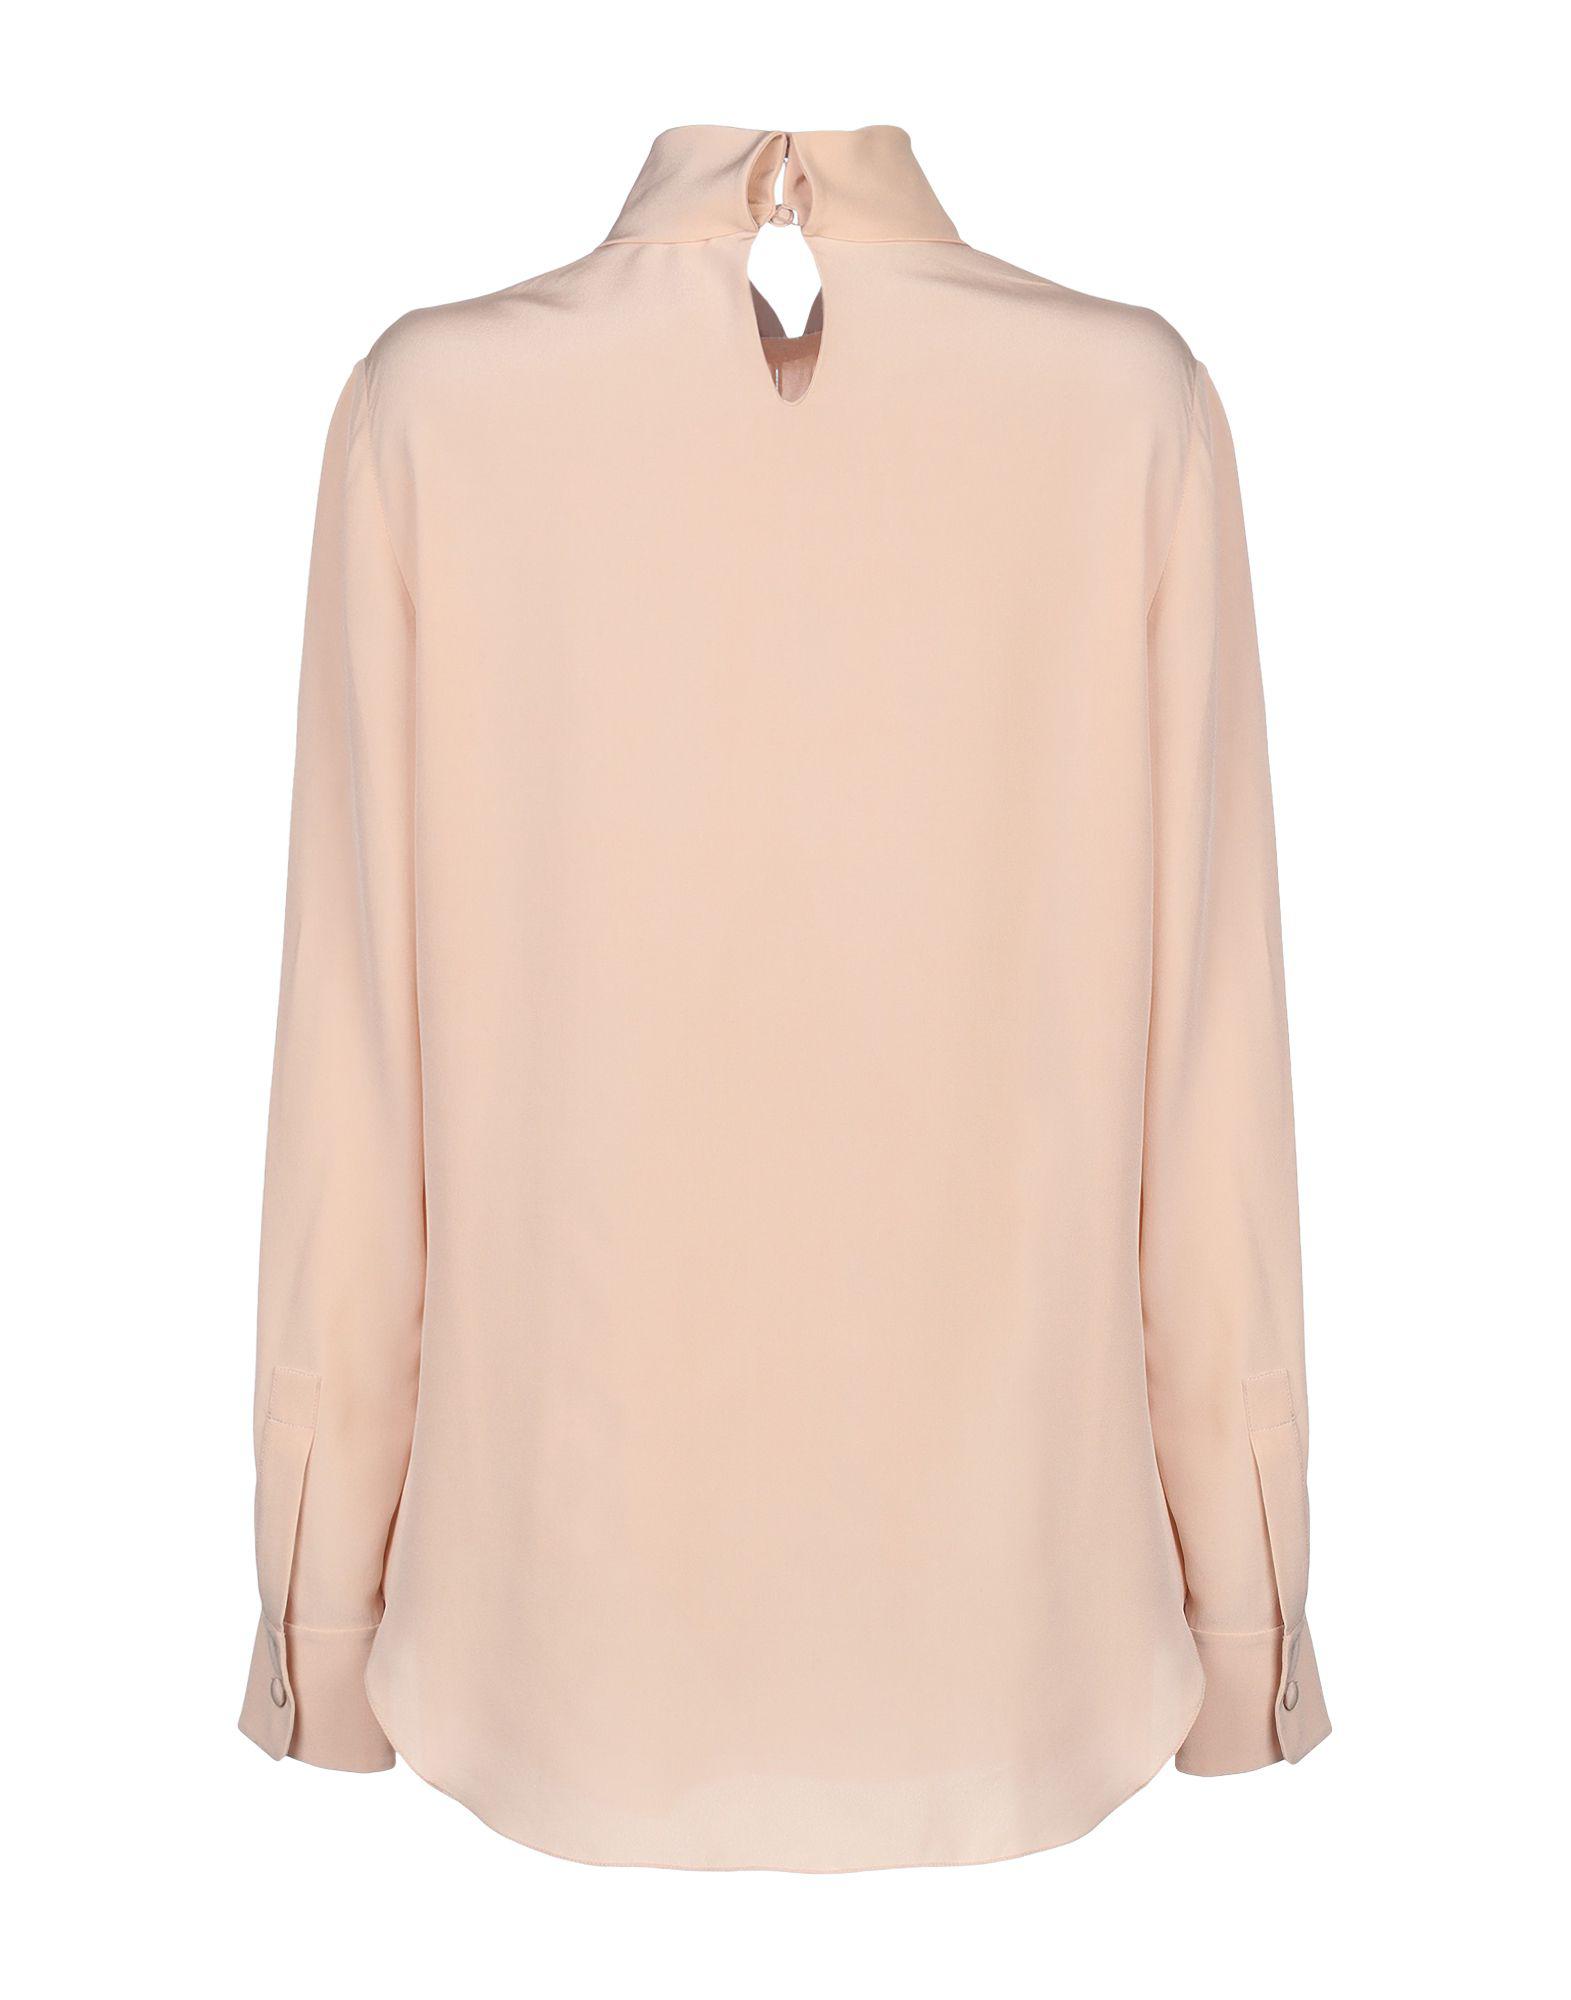 Chloé Silk Blouse in Pale Pink (Pink) - Lyst